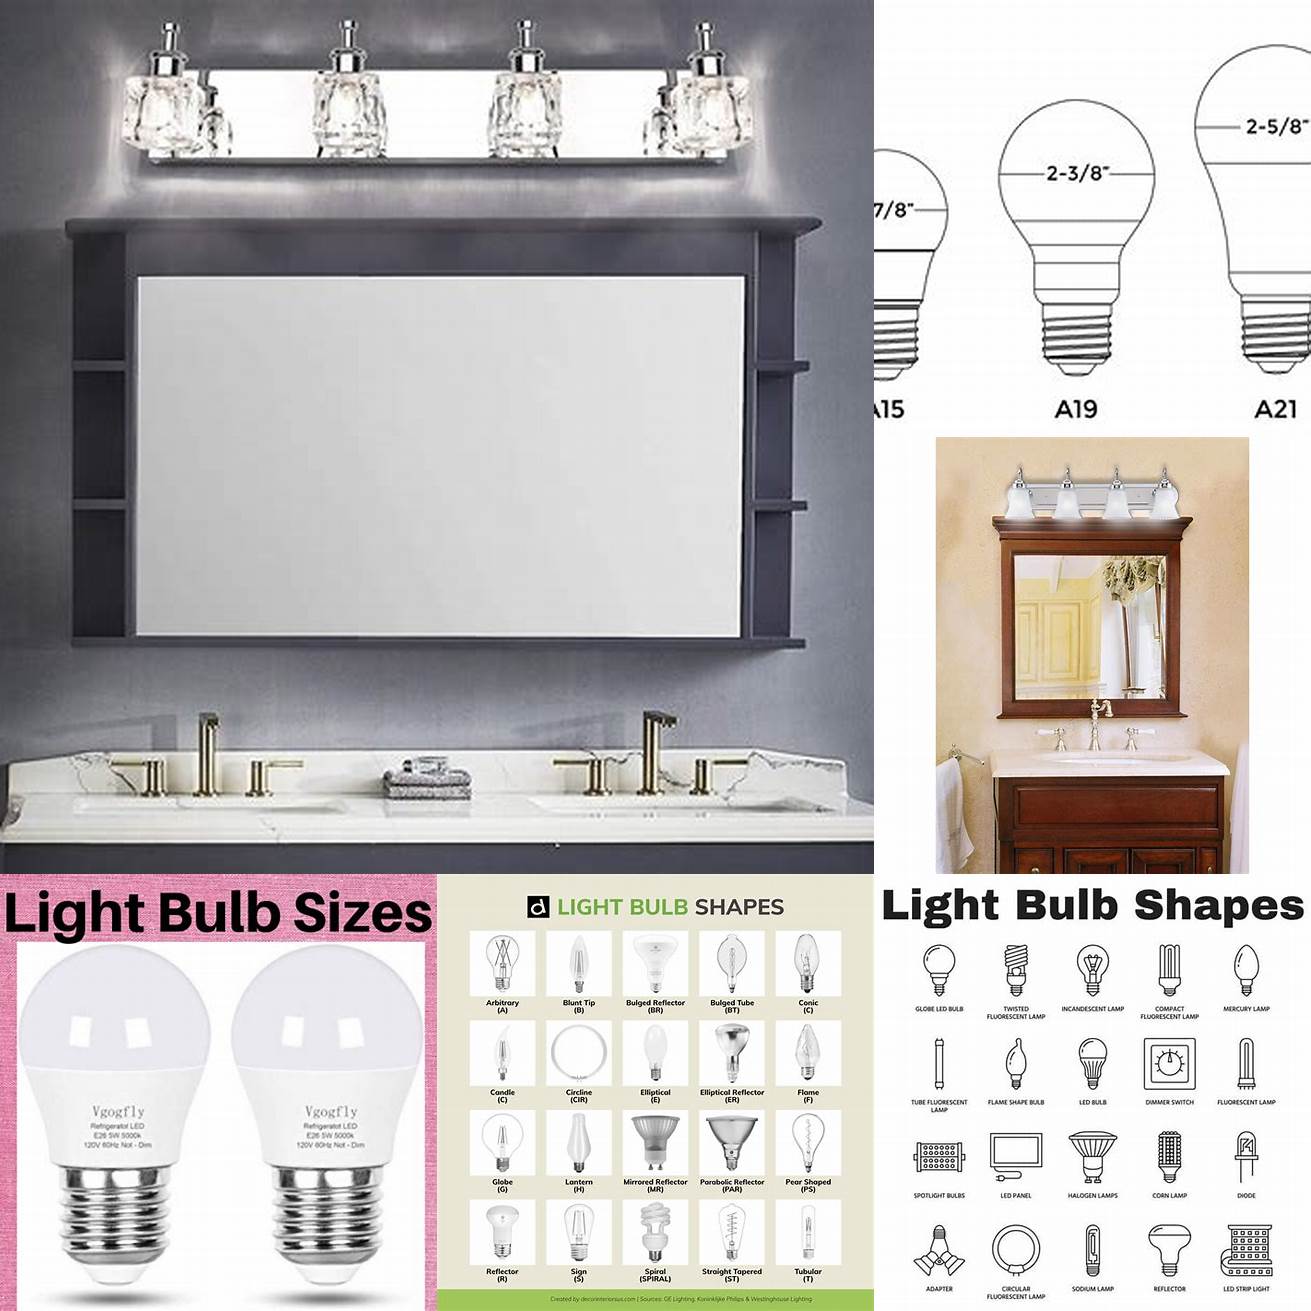 Bathroom Vanity Light Bulbs in Different Shapes and Sizes